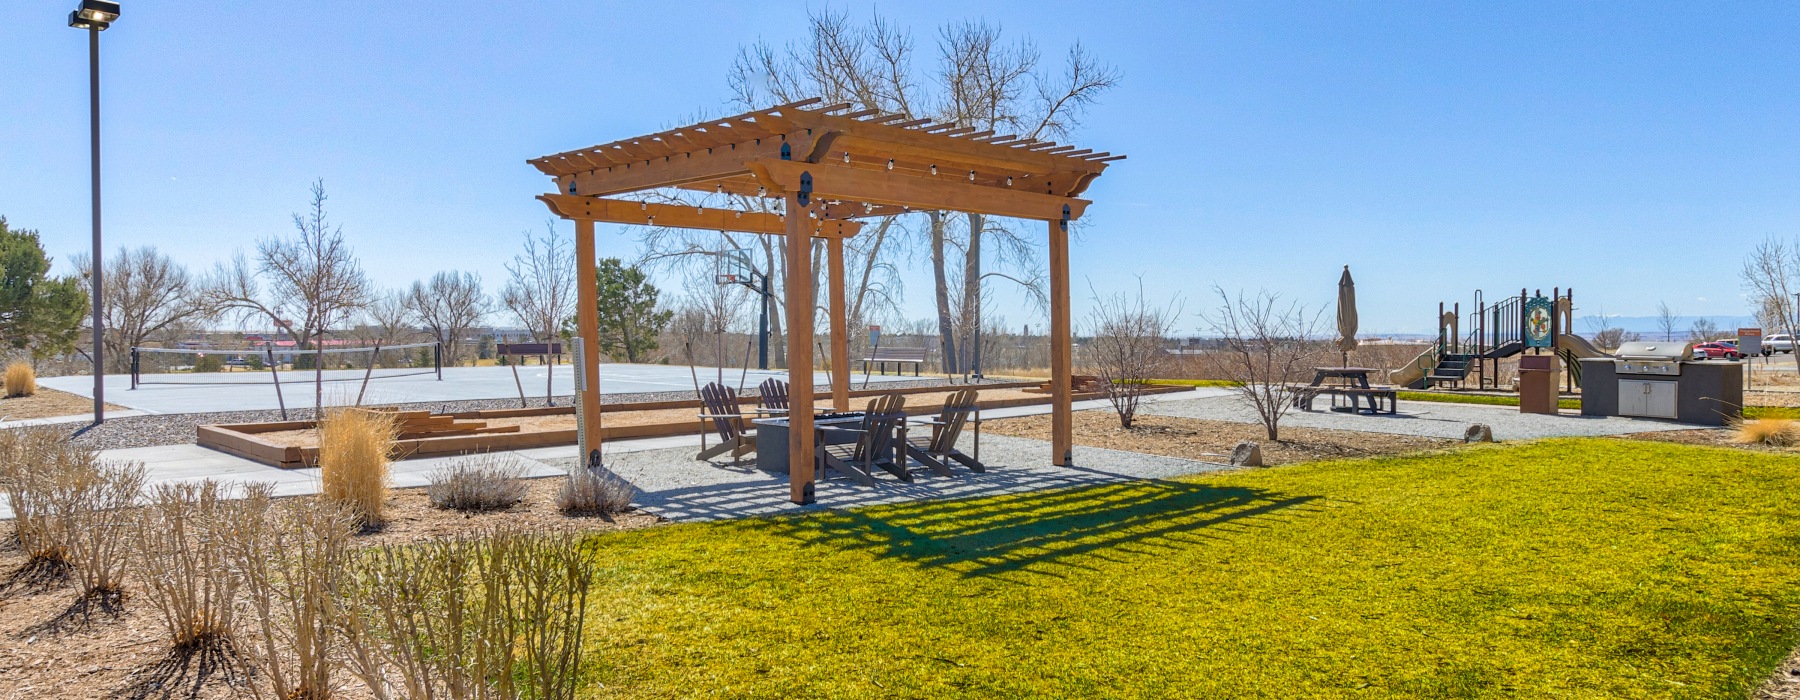 Pergola outside with seating